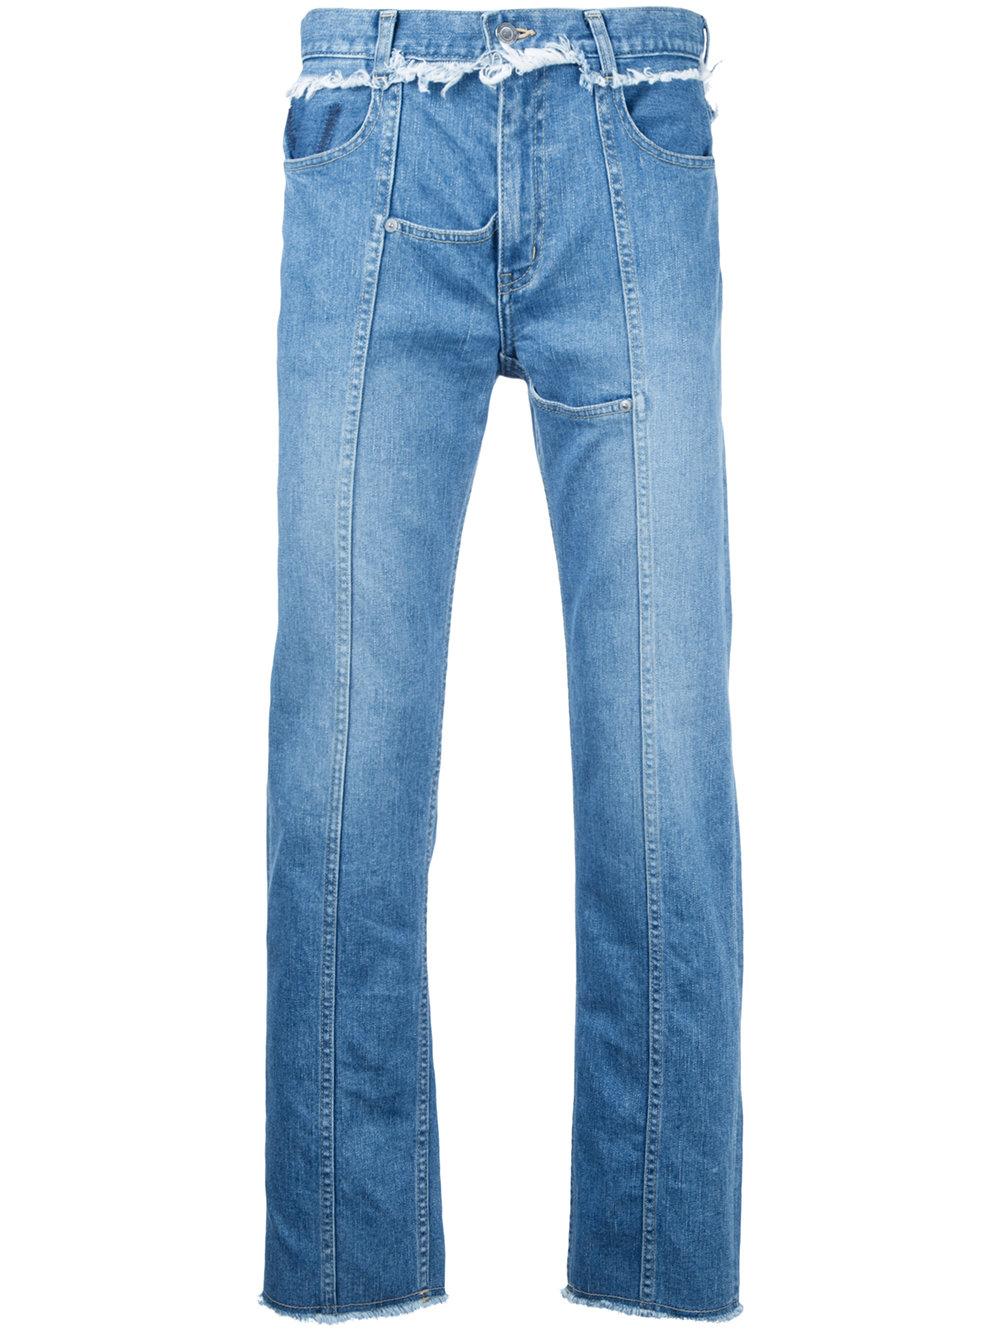 Christian Dada Front Seam Jeans in Blue for Men | Lyst